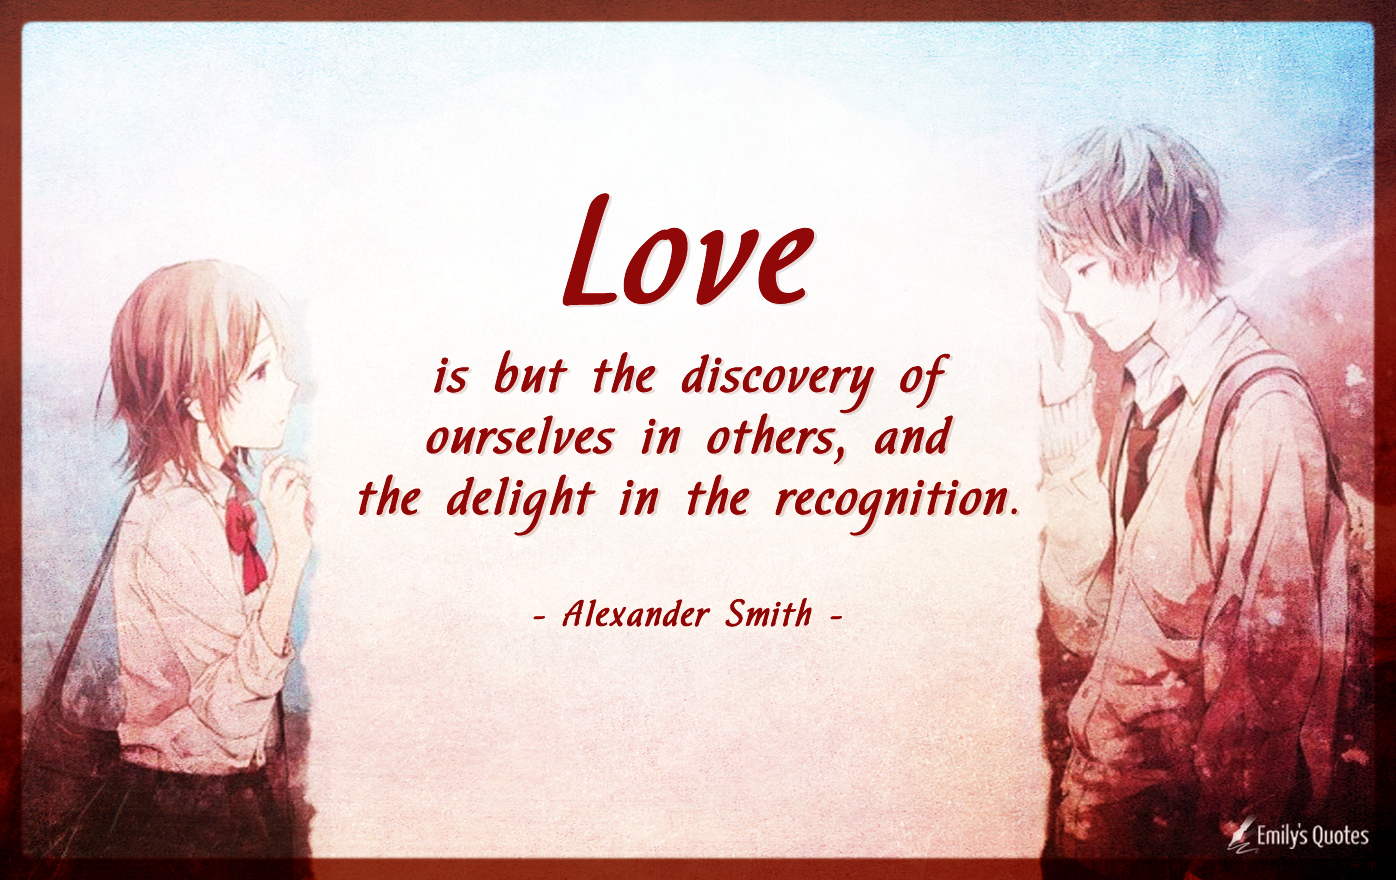 Love is but the discovery of ourselves in others, and the delight in the recognition